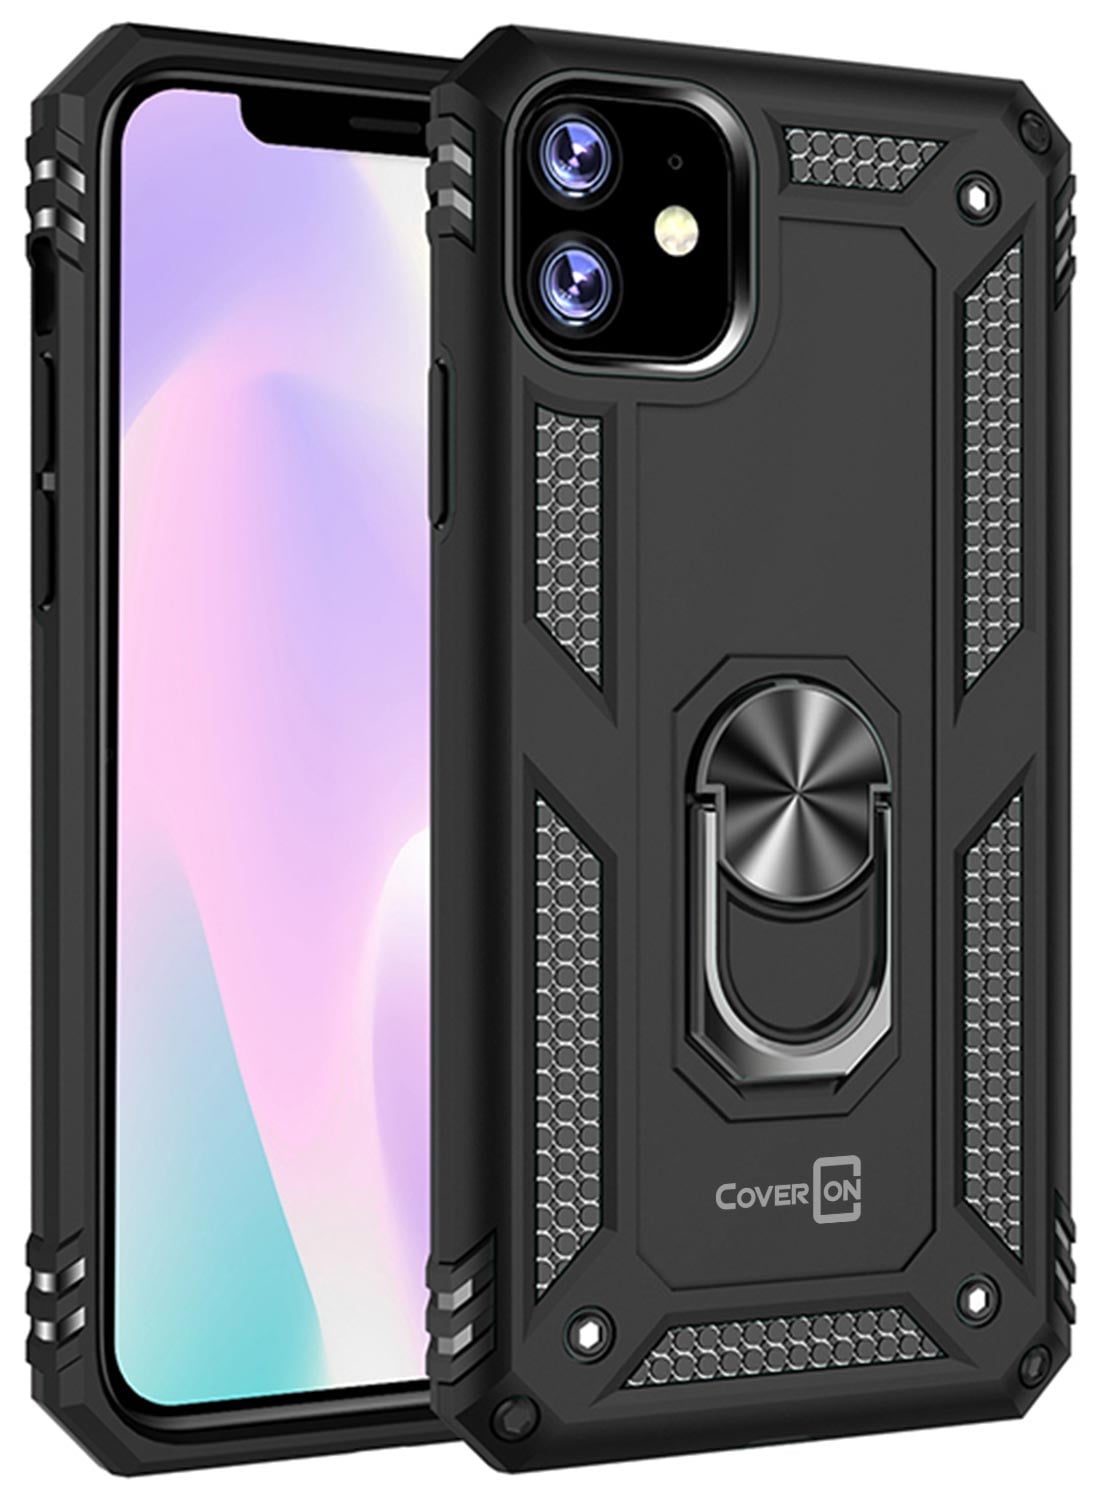 11,Black Fanbiya Armor Case for iPhone 11 Invisible Kickstand Drop Protection Case Cell Phone Holder for Car Clear Hard PC Rotate Ring Stand Phone Cover and Screen Protector 